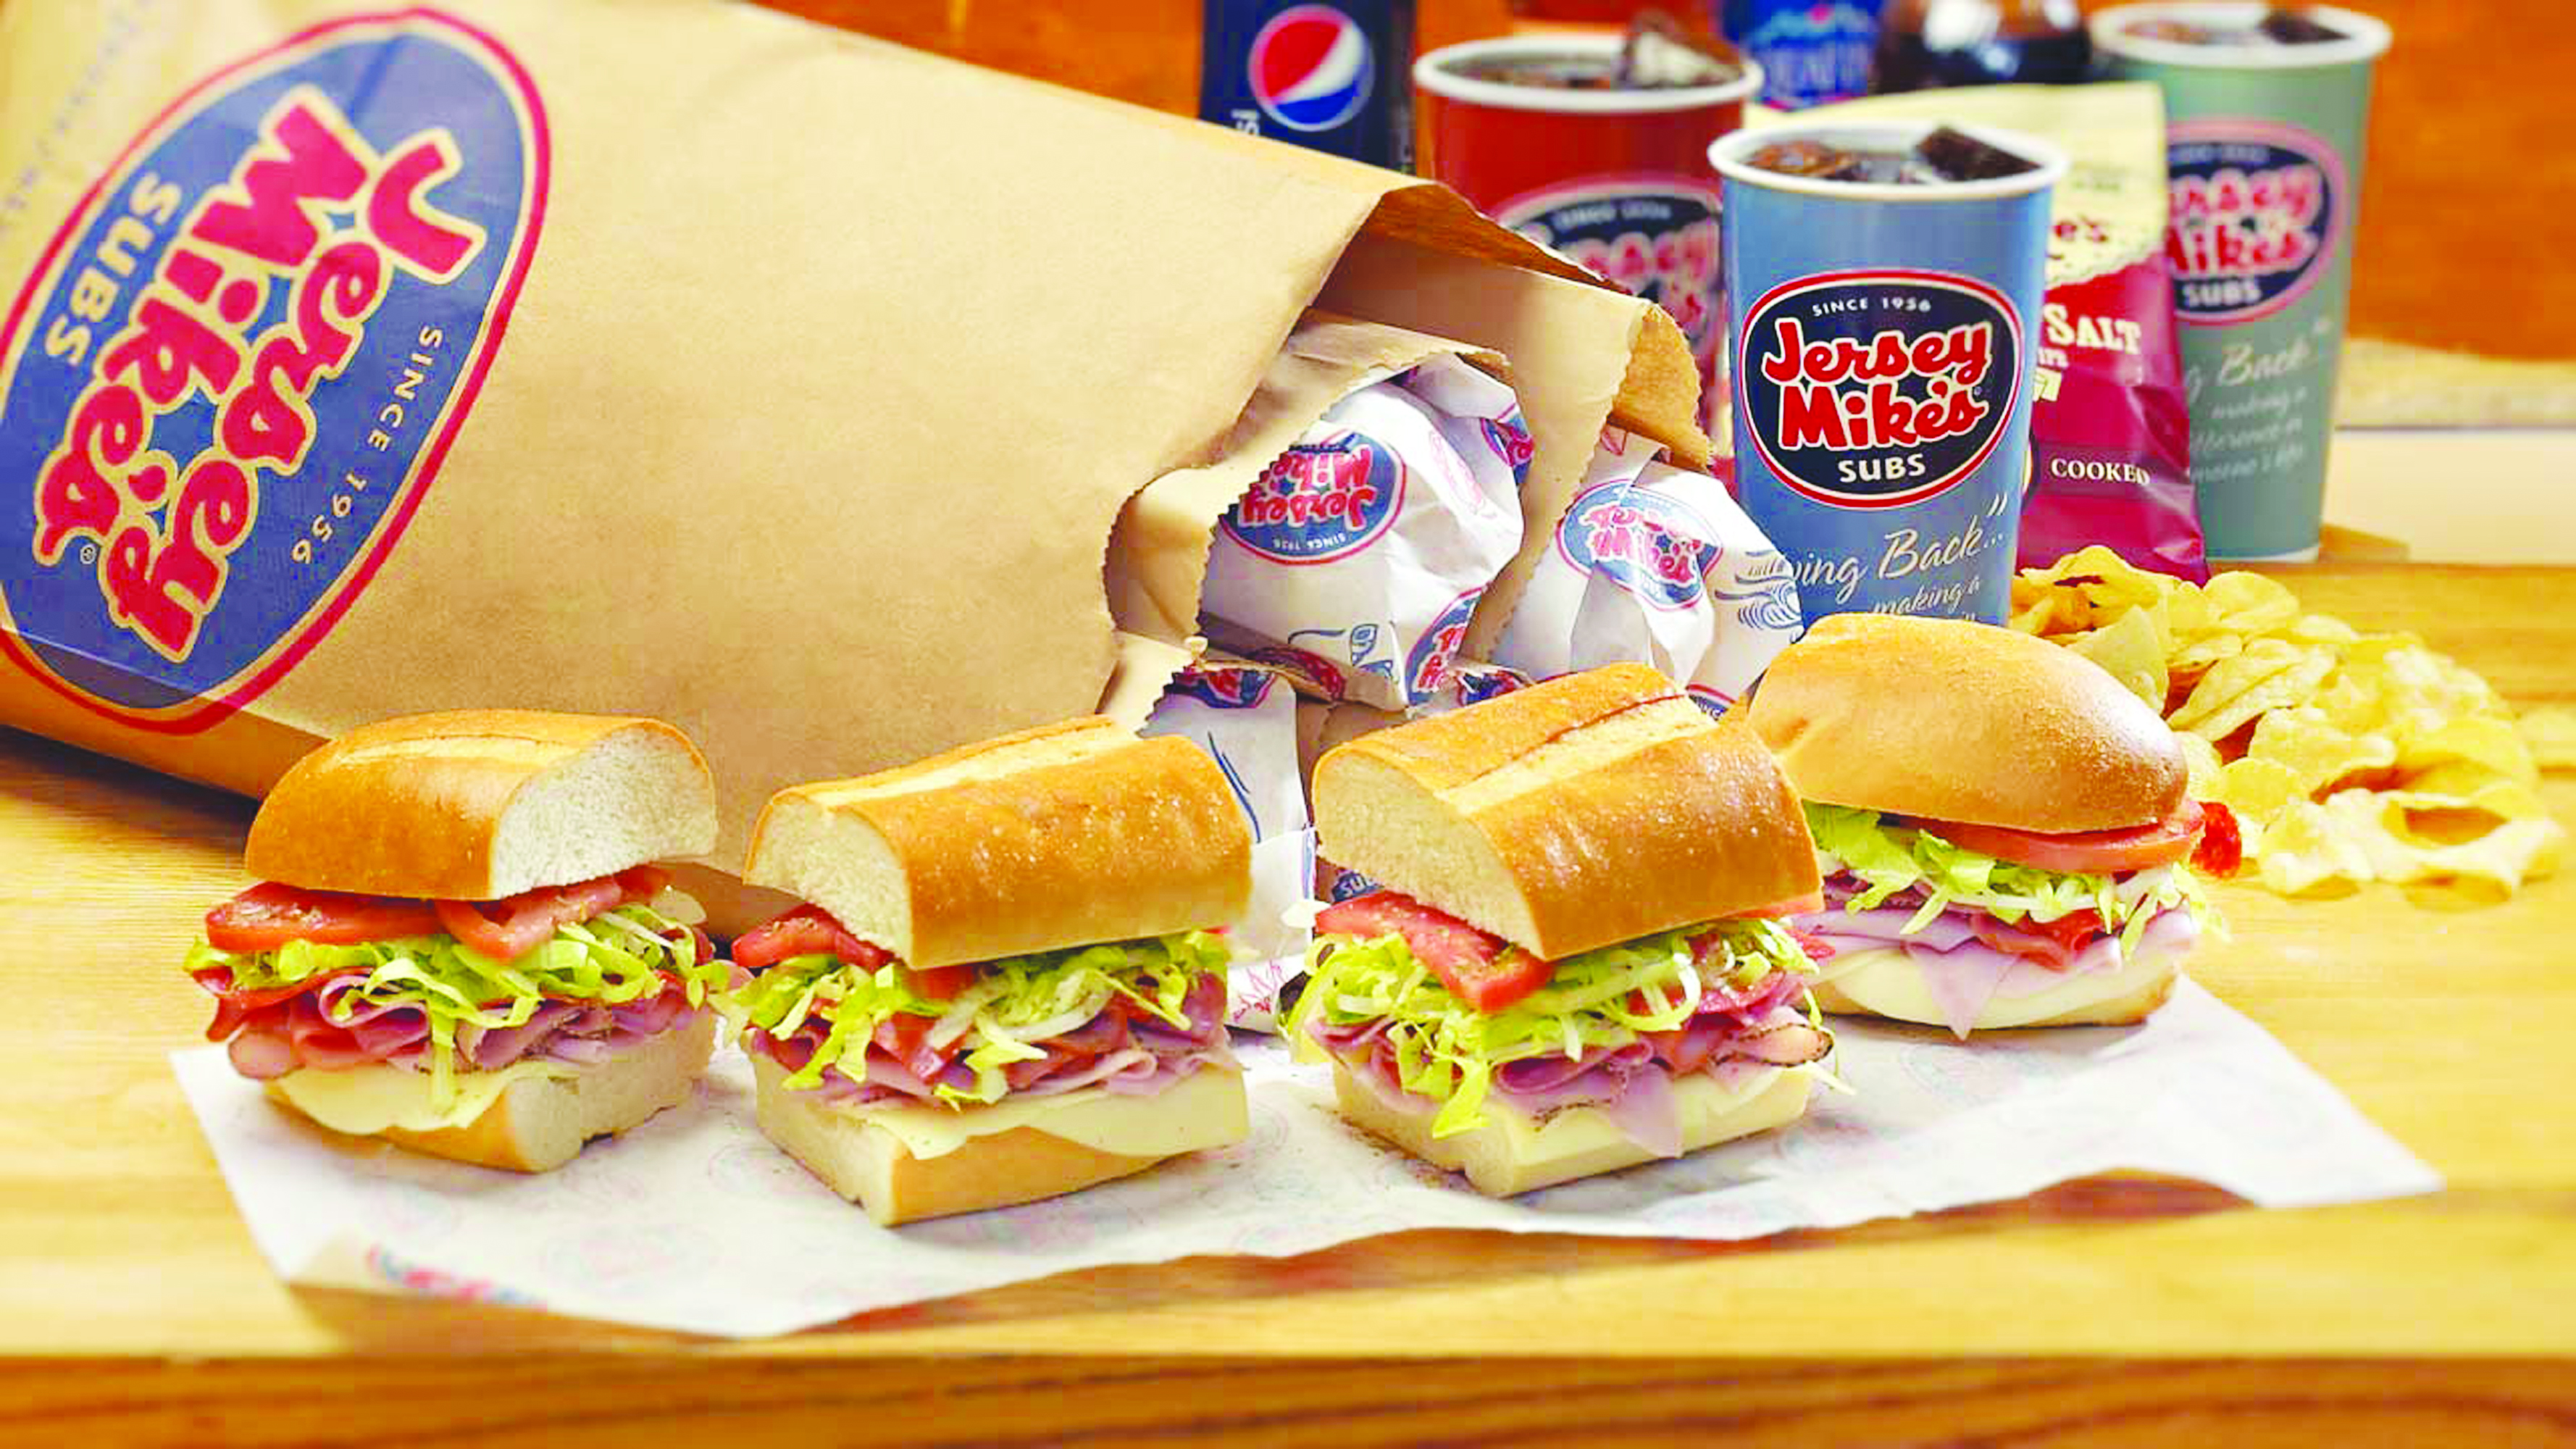 location jersey mike's